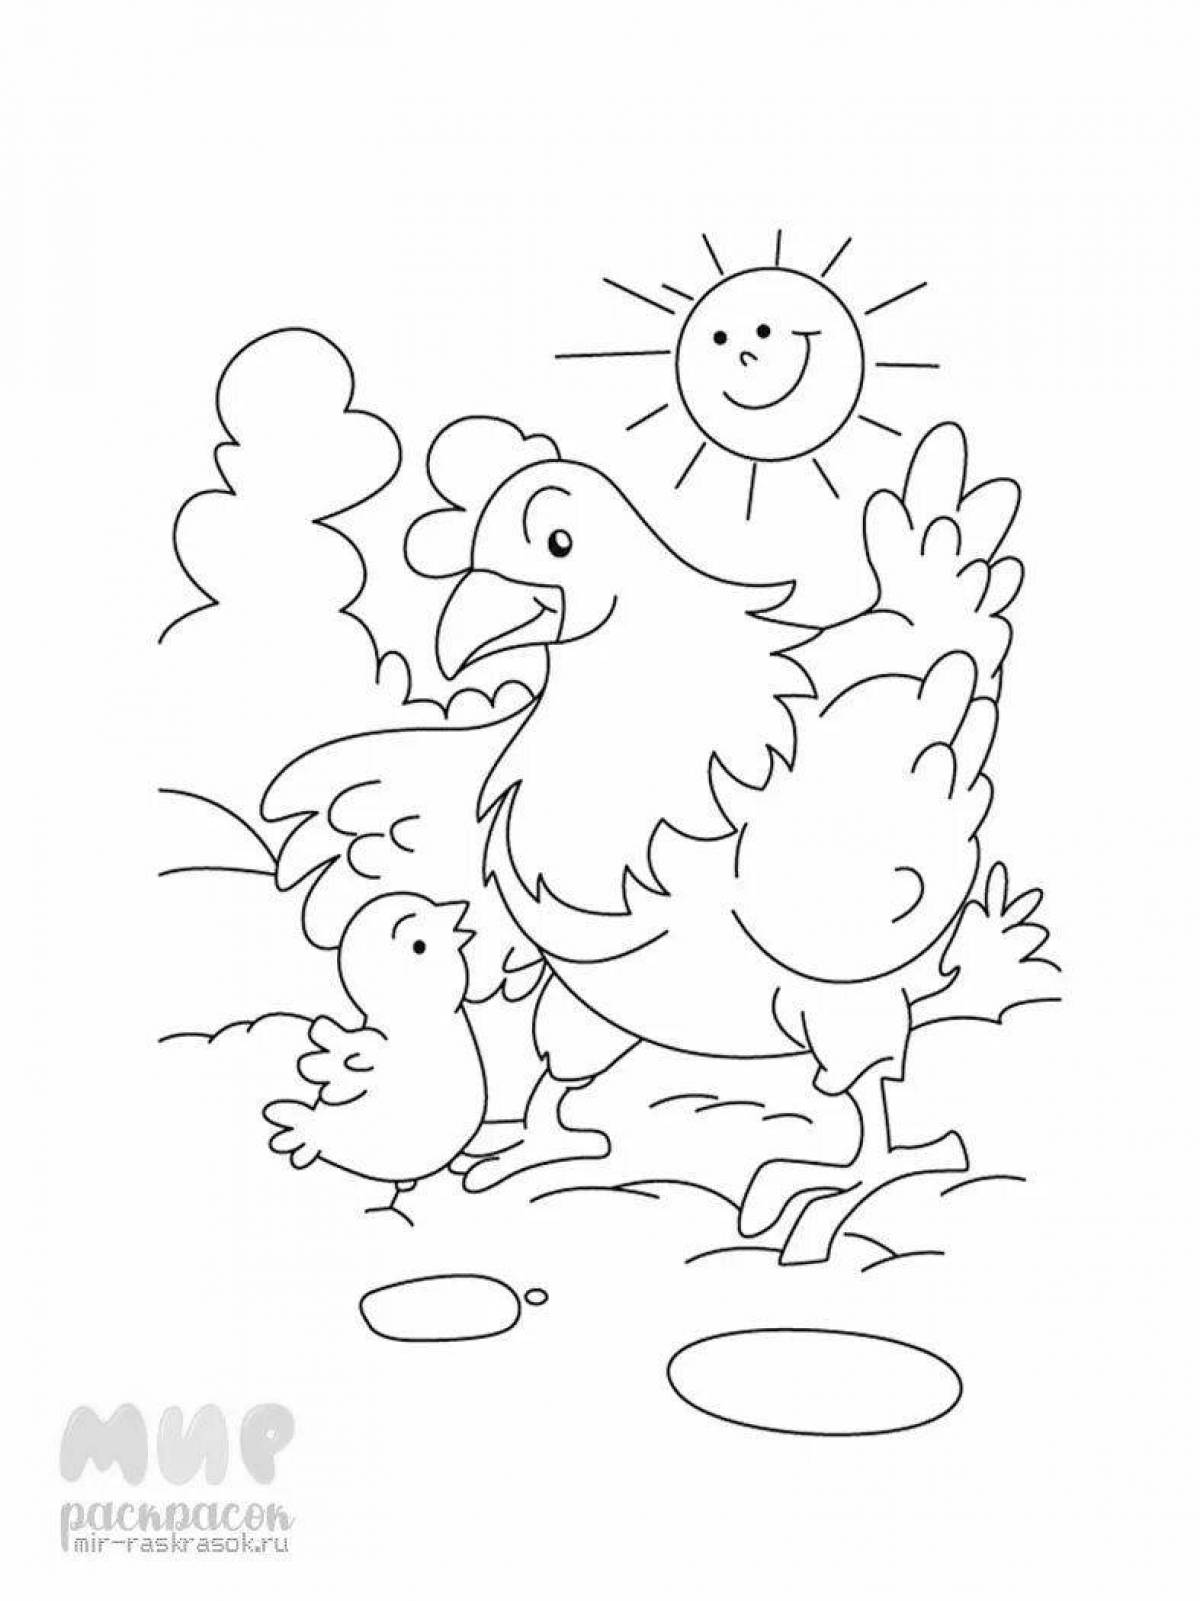 Artistic chicken ghana coloring page